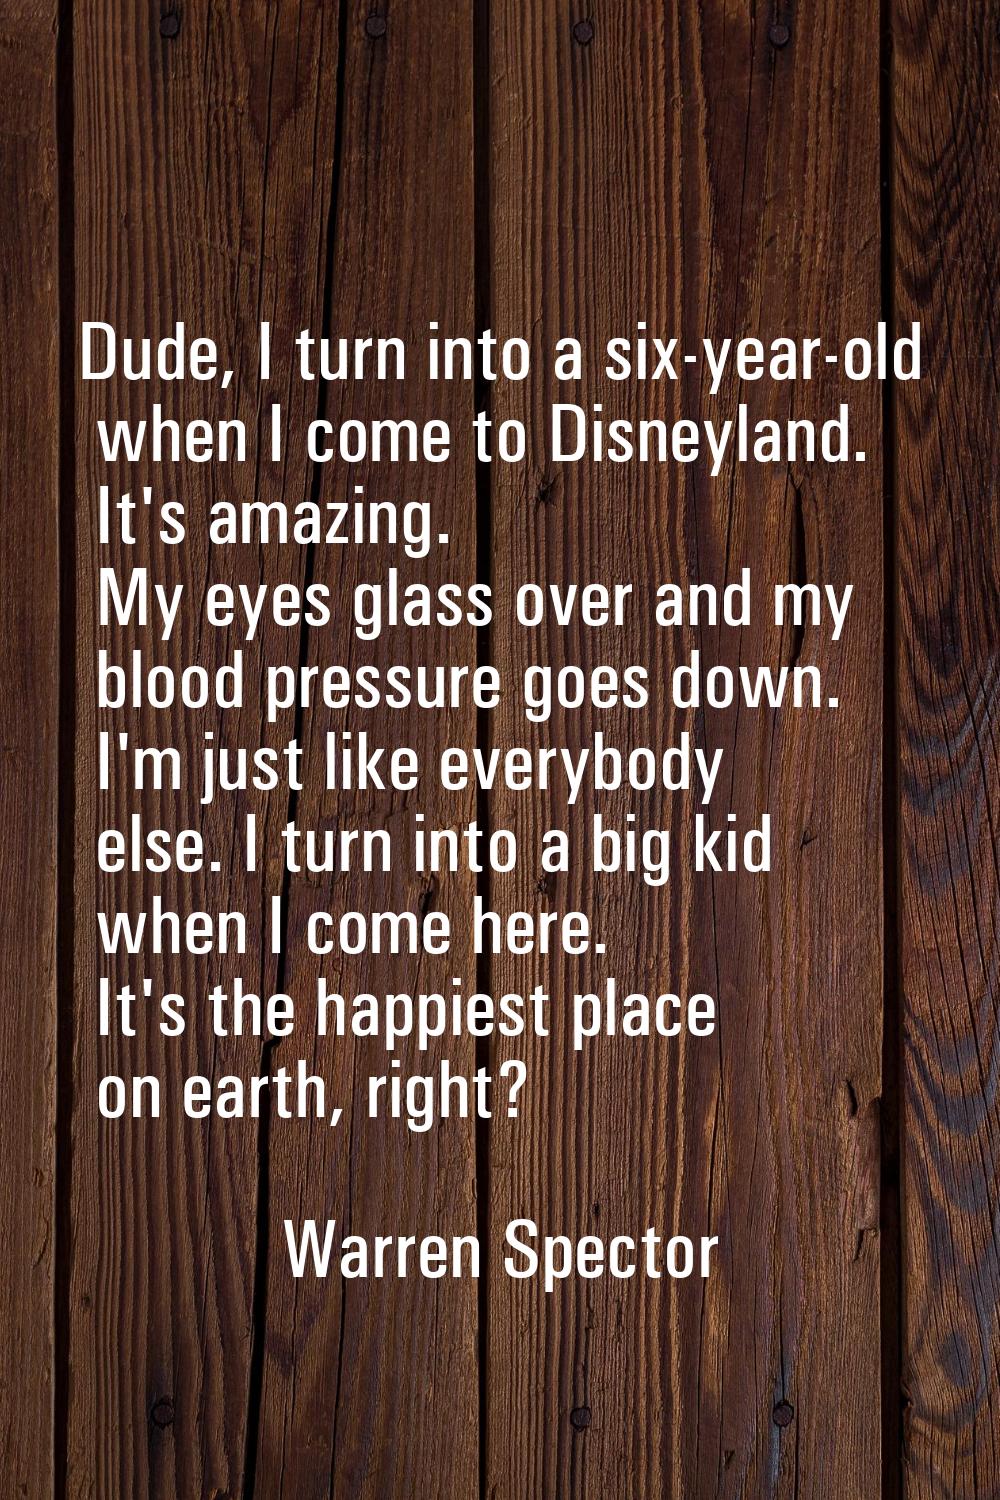 Dude, I turn into a six-year-old when I come to Disneyland. It's amazing. My eyes glass over and my